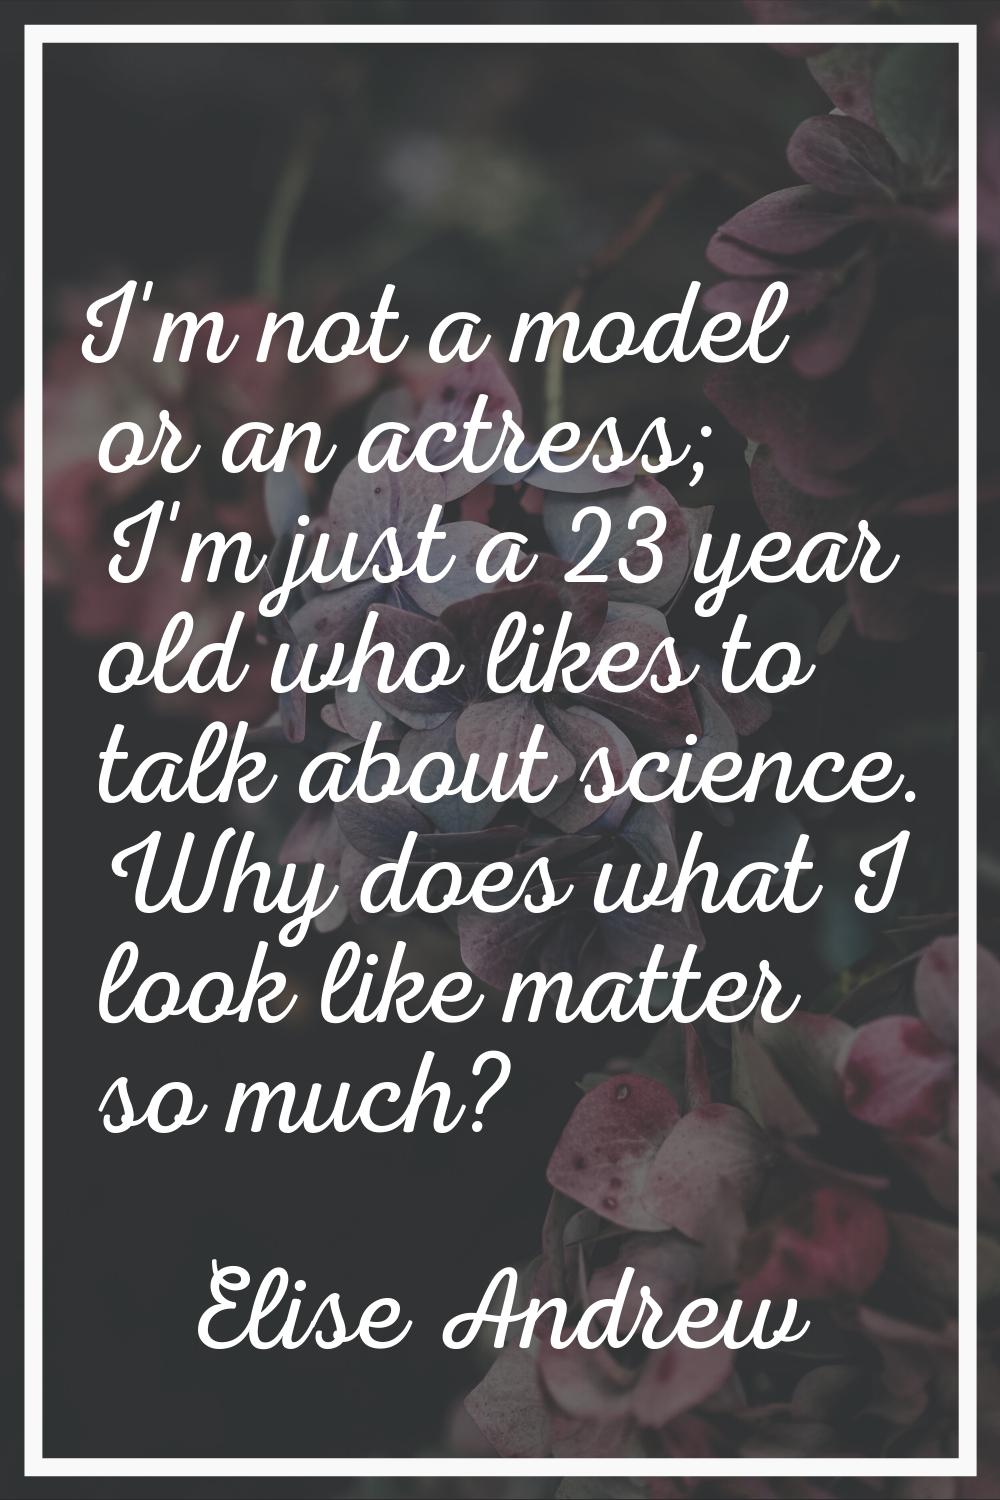 I'm not a model or an actress; I'm just a 23 year old who likes to talk about science. Why does wha